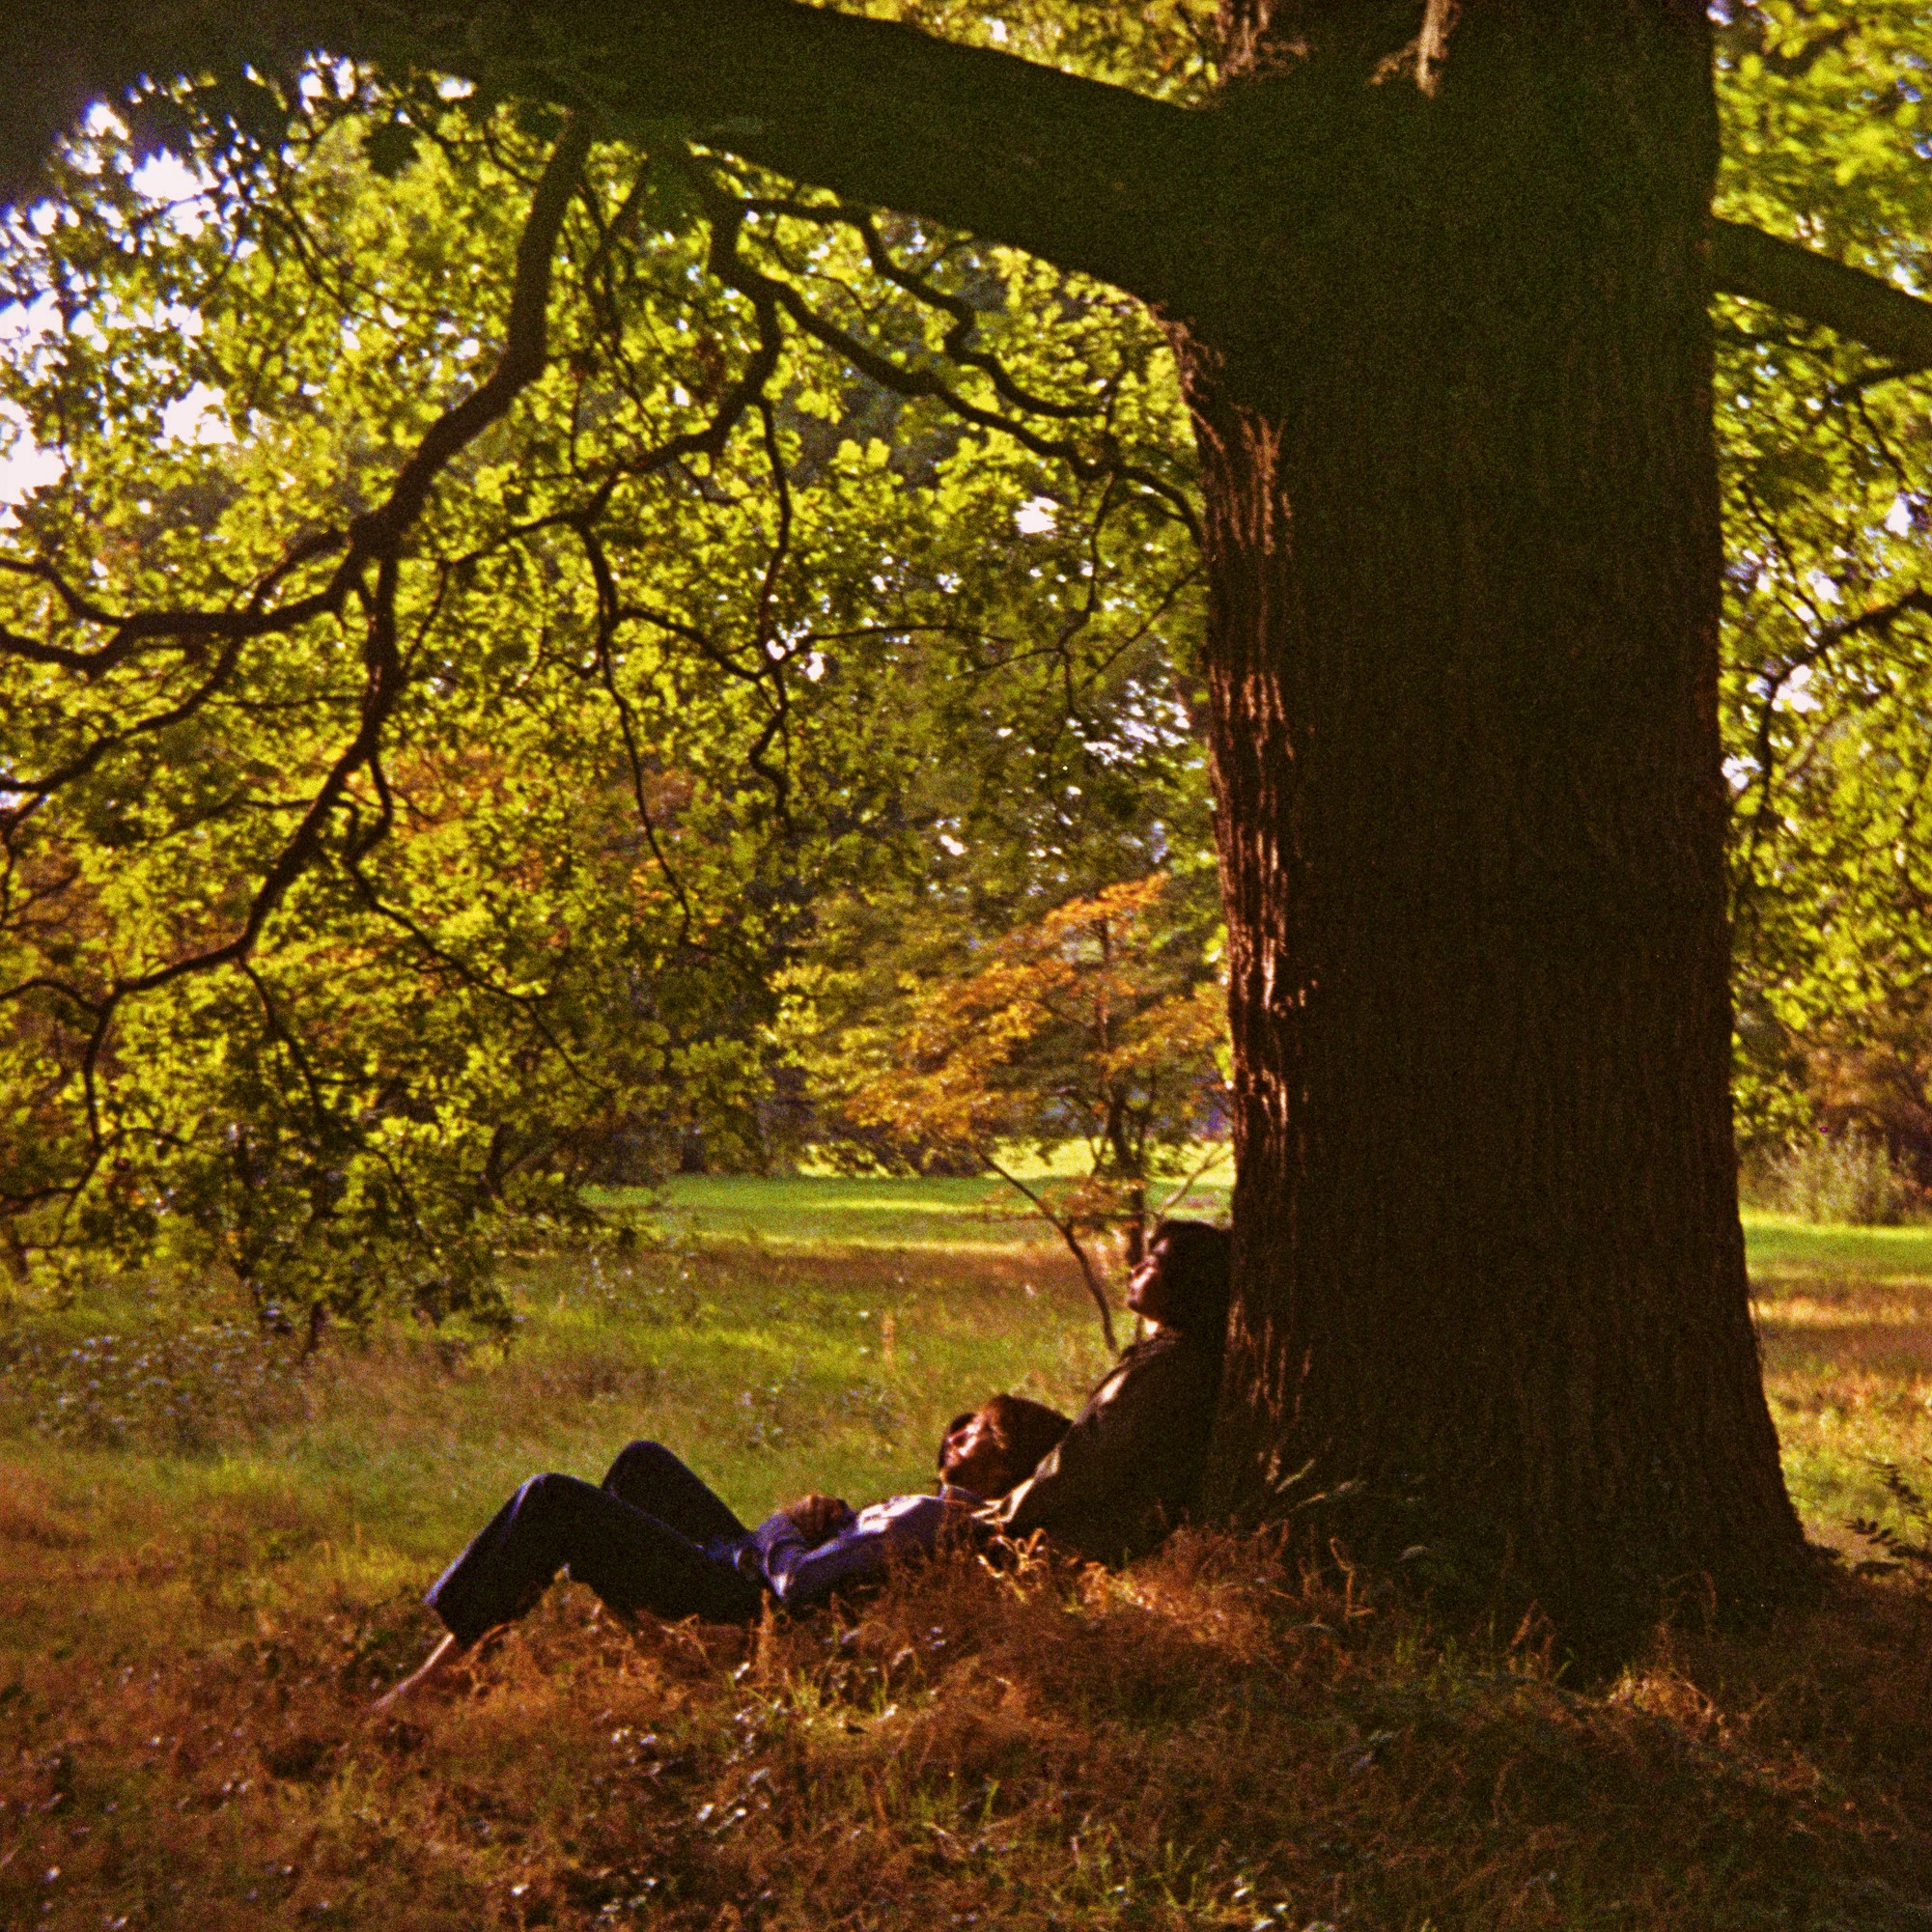 John Lennon Estate Invites You  to Relax, Breathe and Remember to “Hold On World”